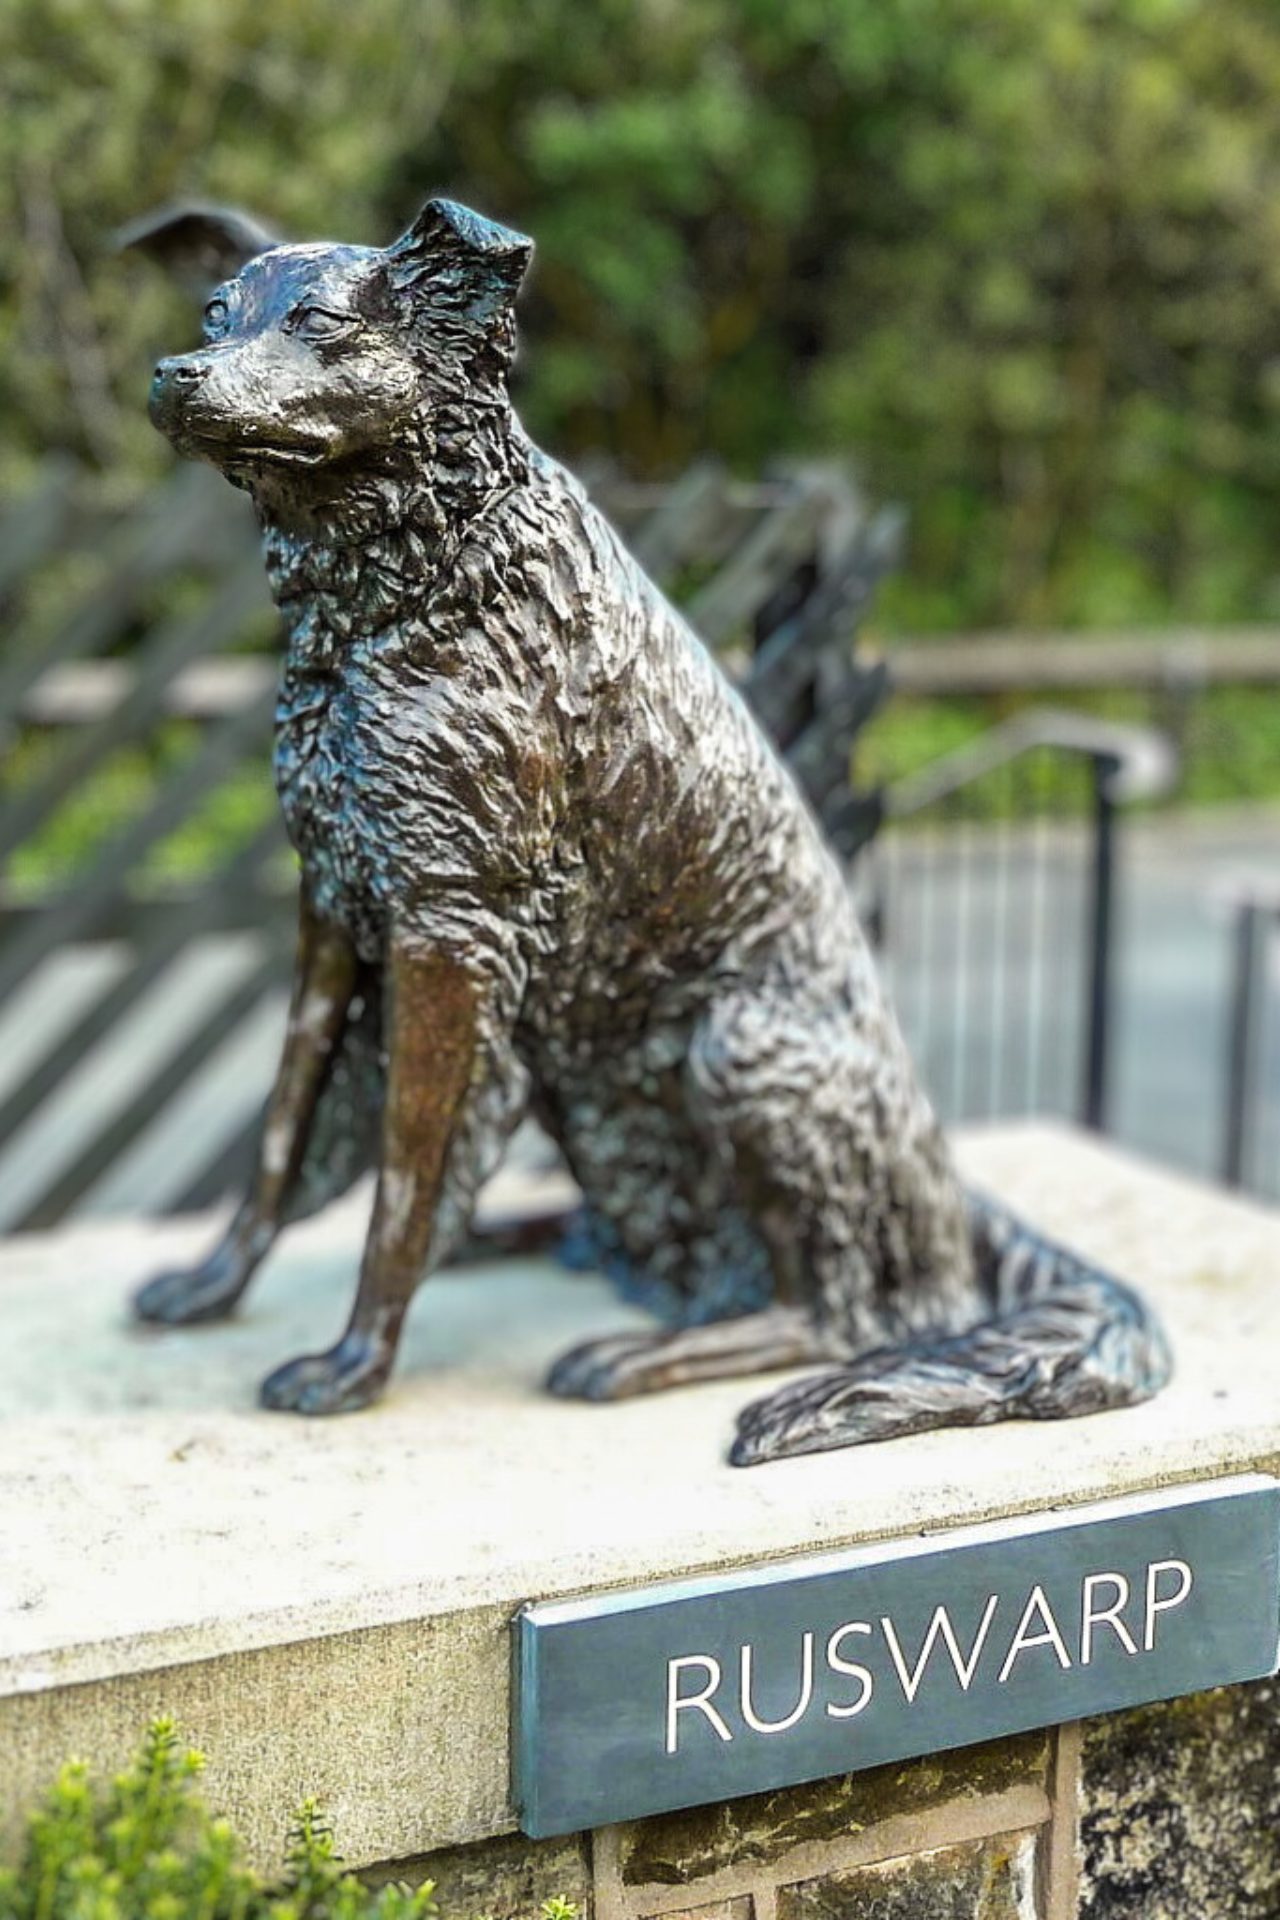 A bronze statue of a dog sitting on a stone pedestal. The dog has a brown coat . The pedestal has an attached sign that reads 'Ruswarp'. There are trees in the background.